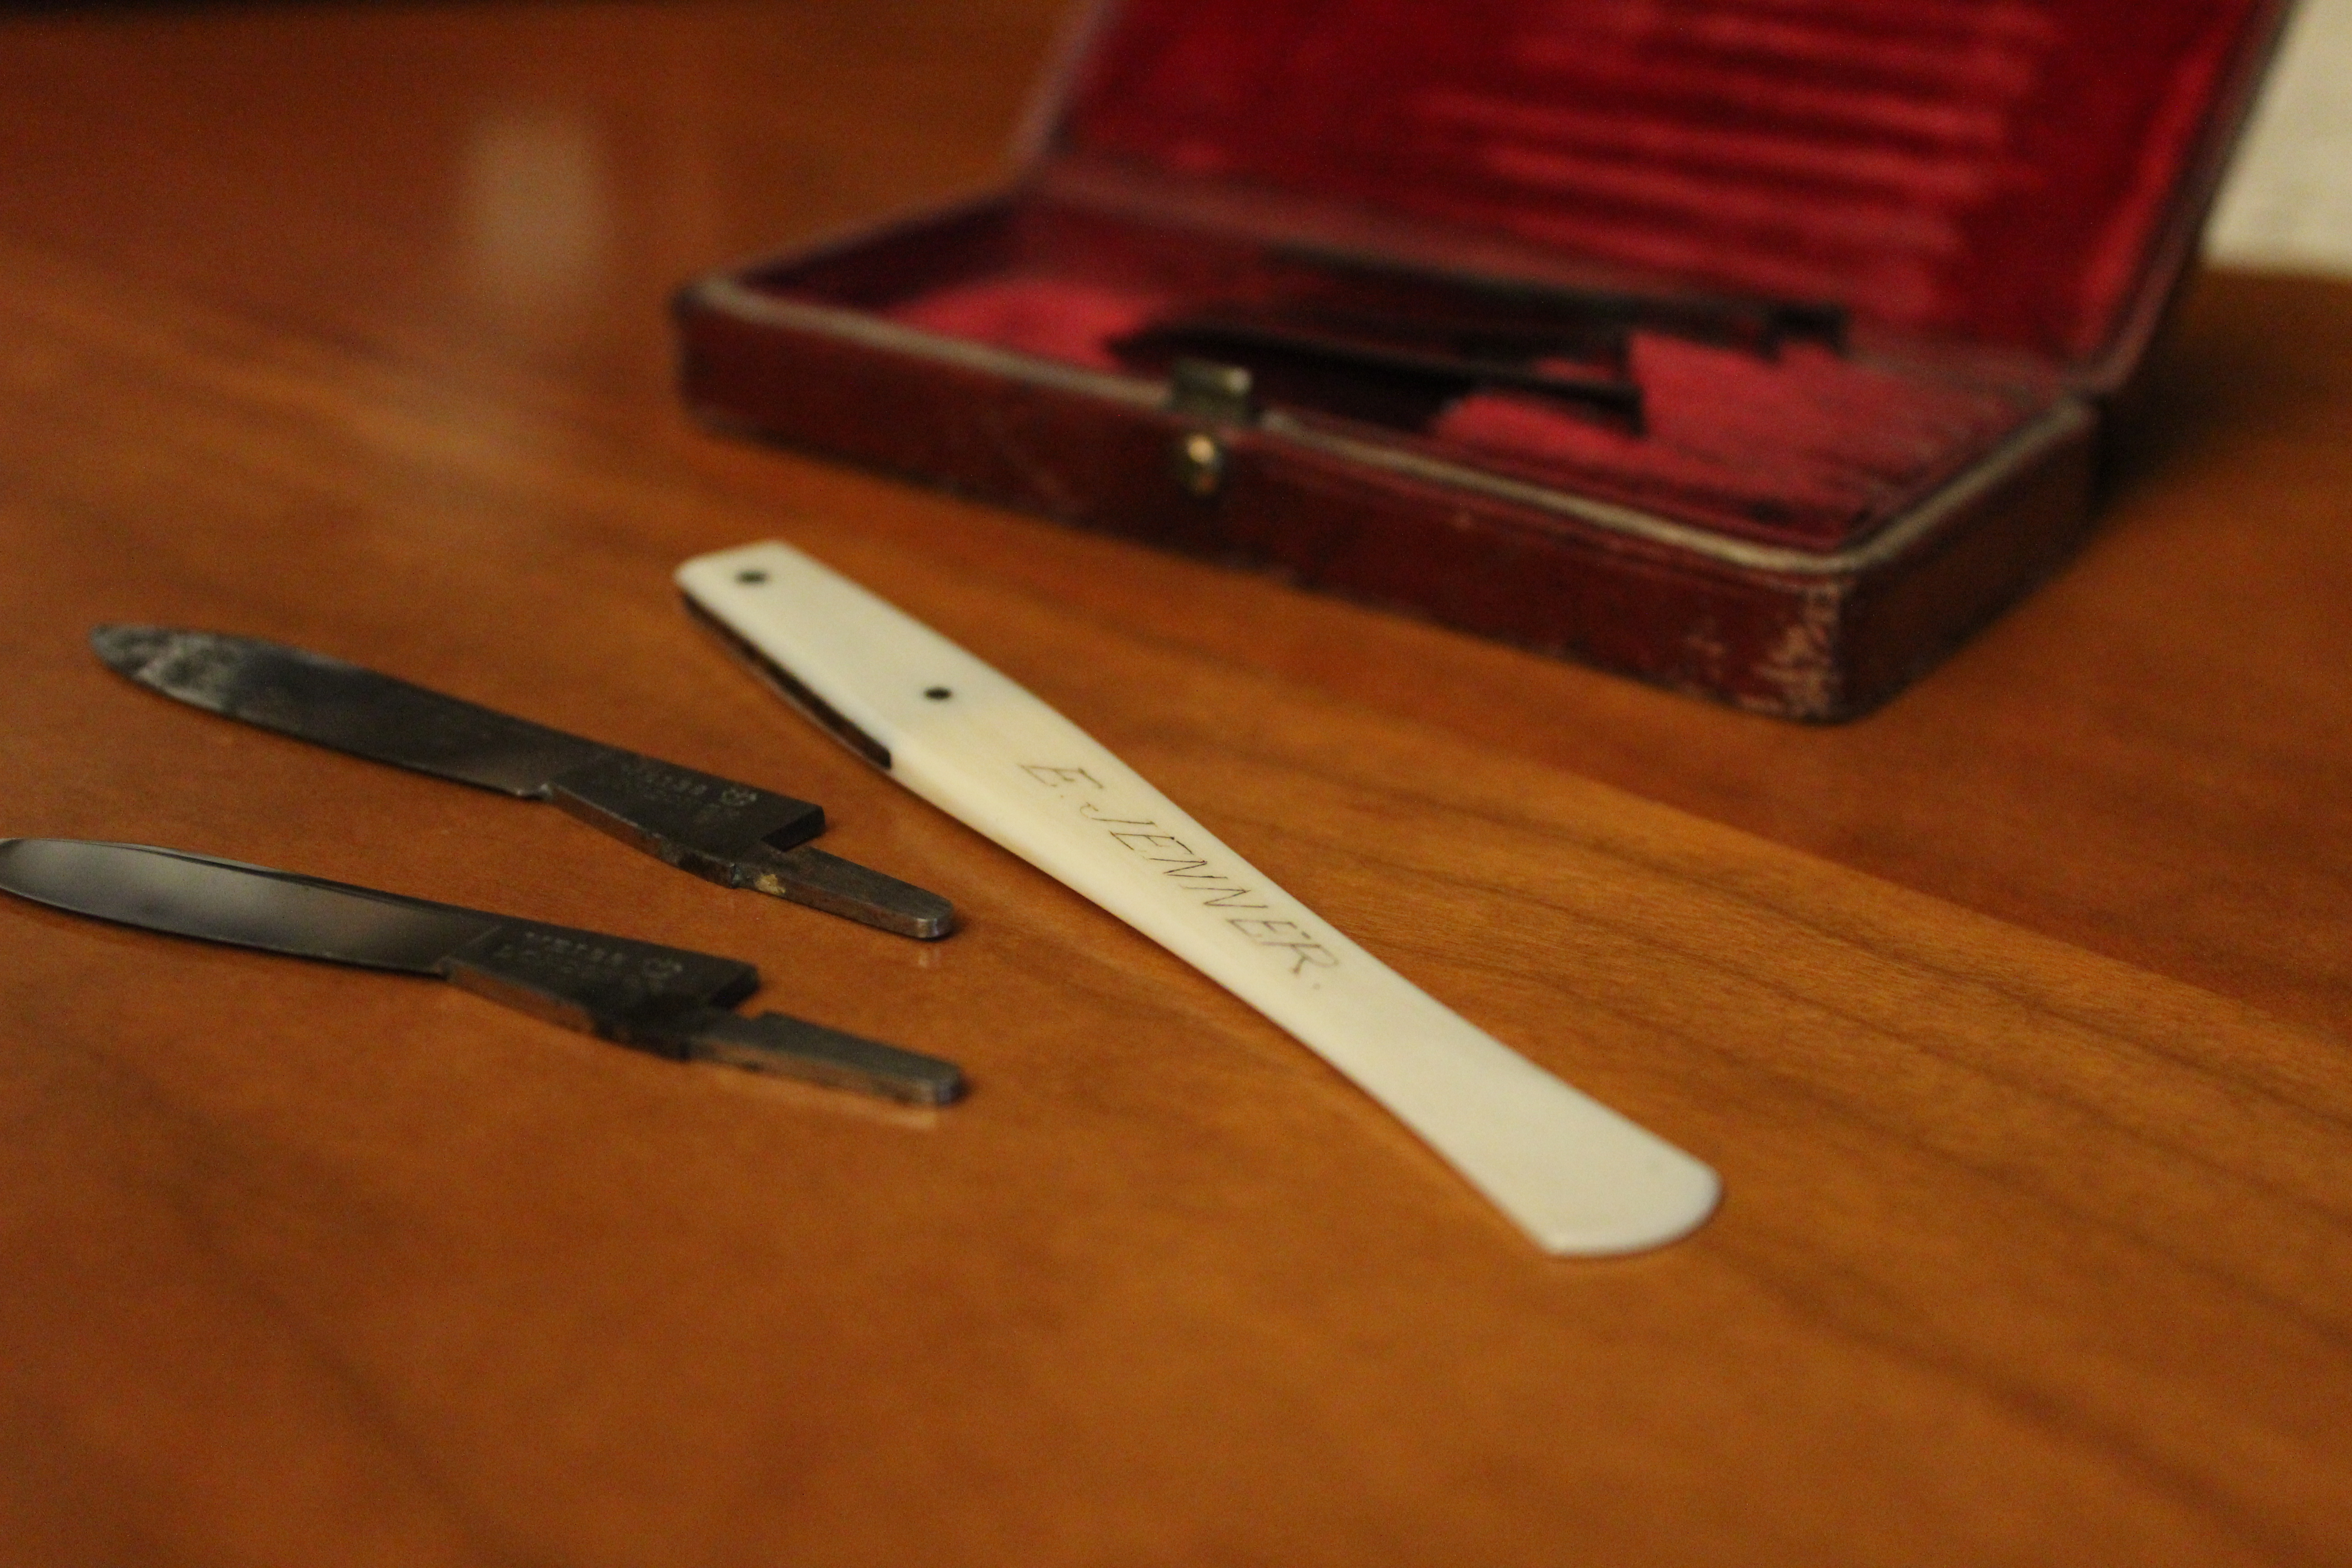 An open wooden case displaying a scalpel set with 'Jenner' transcribed.